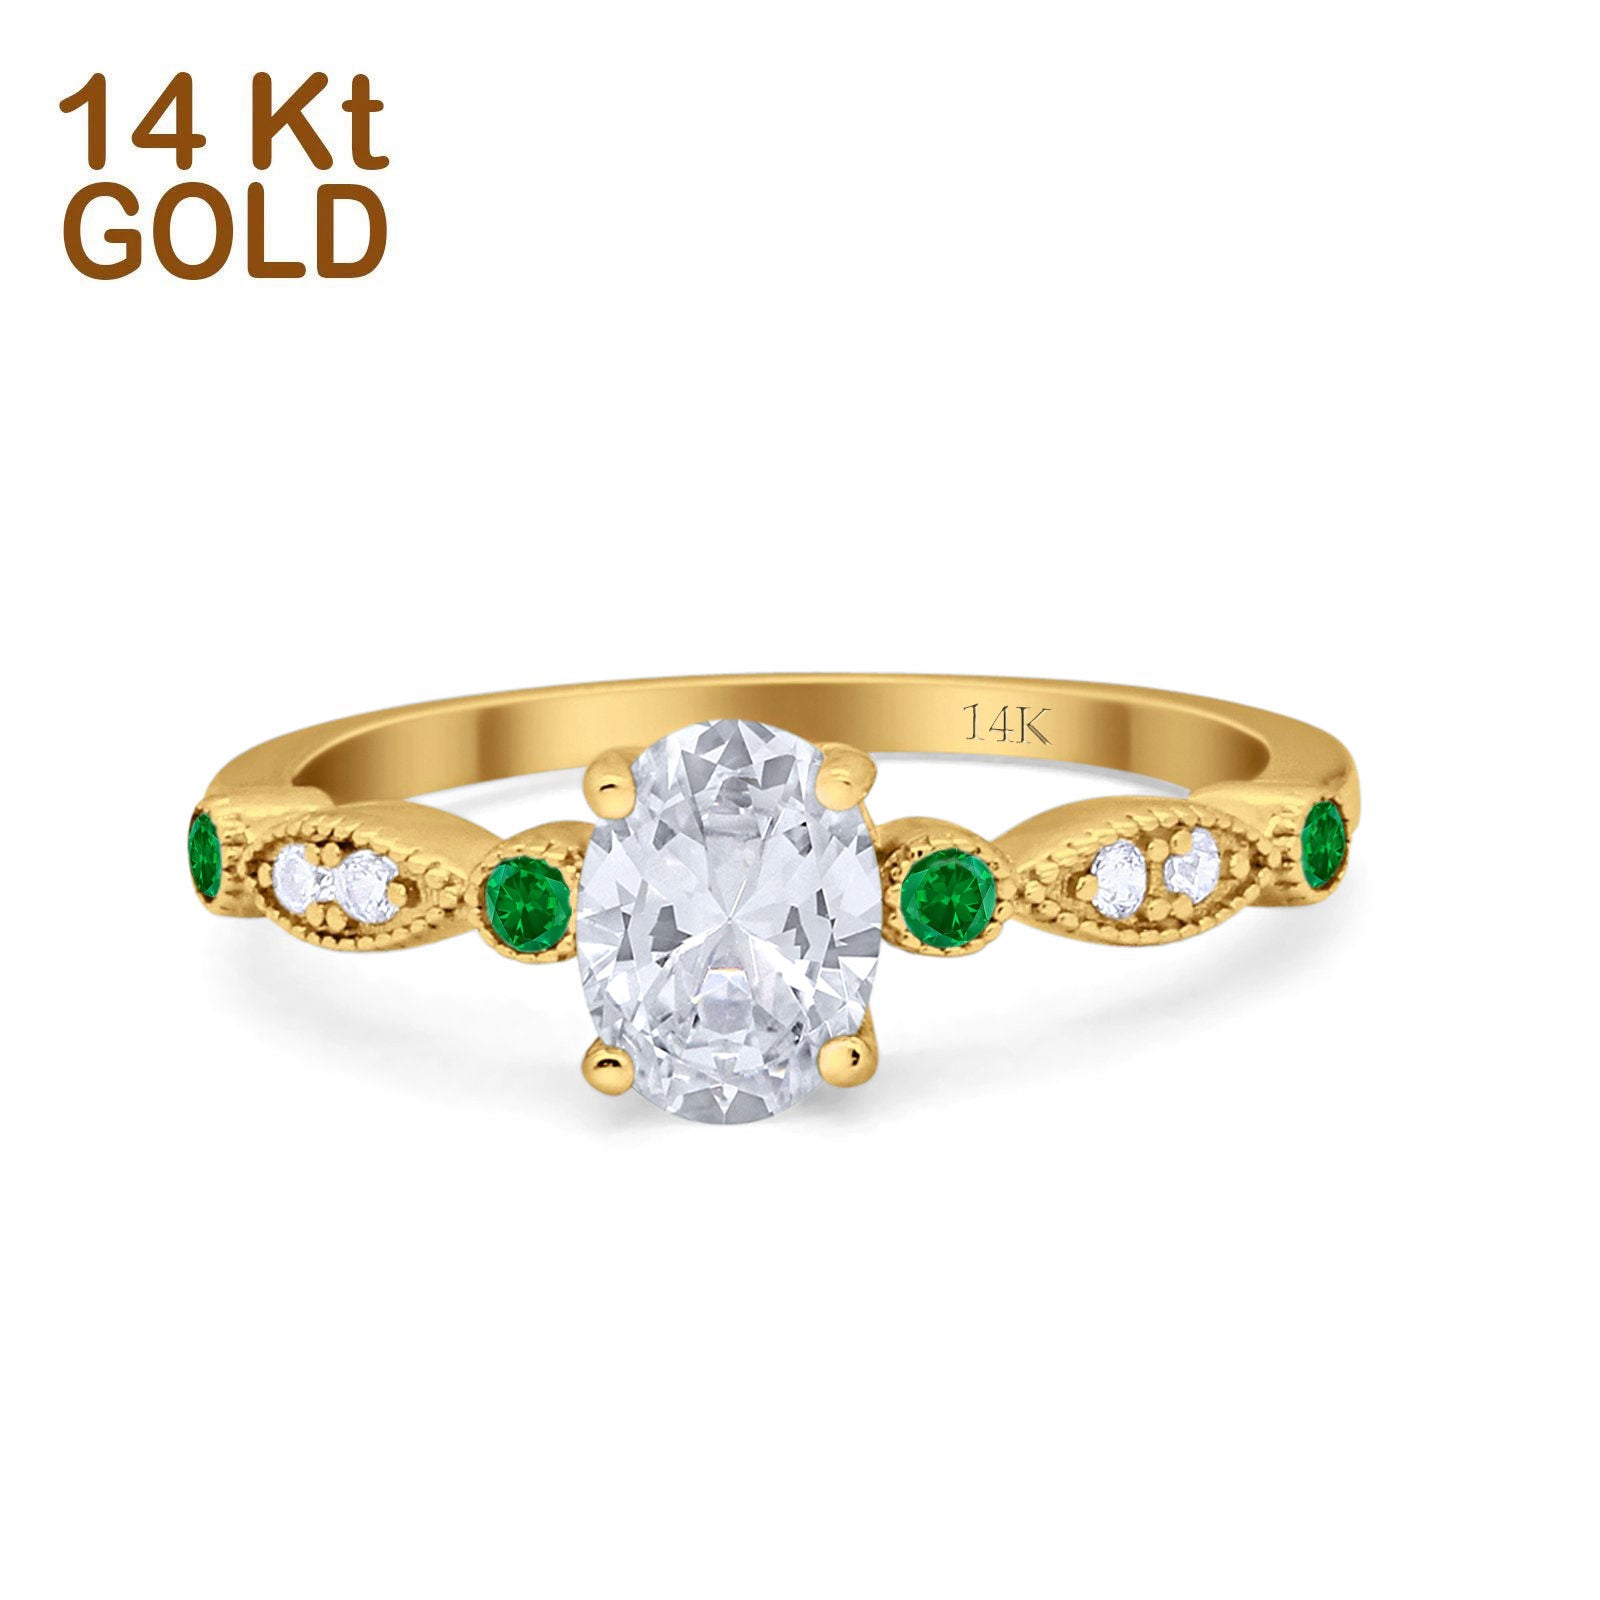 14K Gold Vintage Style Oval Shape Bridal Green Emerald Simulated Cubic Zirconia Wedding Engagement Ring